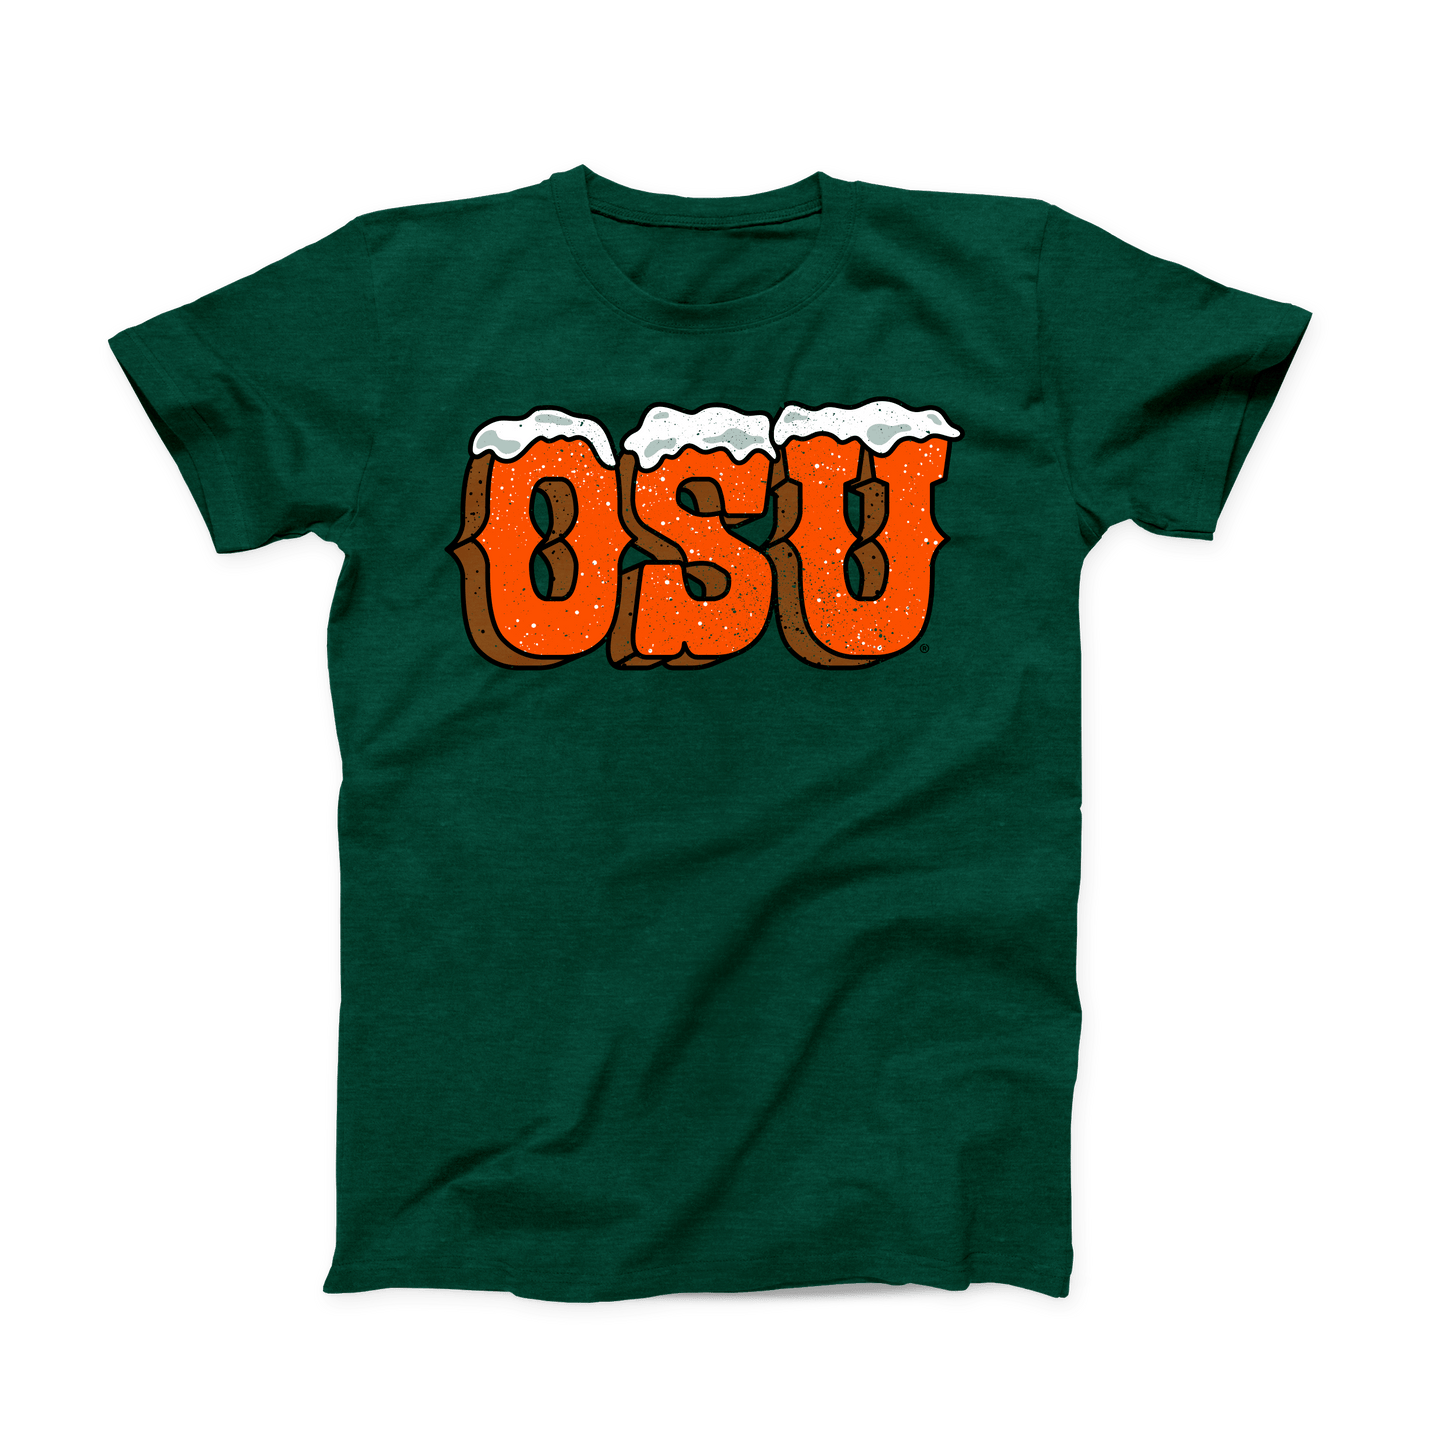 Forest Green T-shirt with a snow covered orange "OSU" across the front.